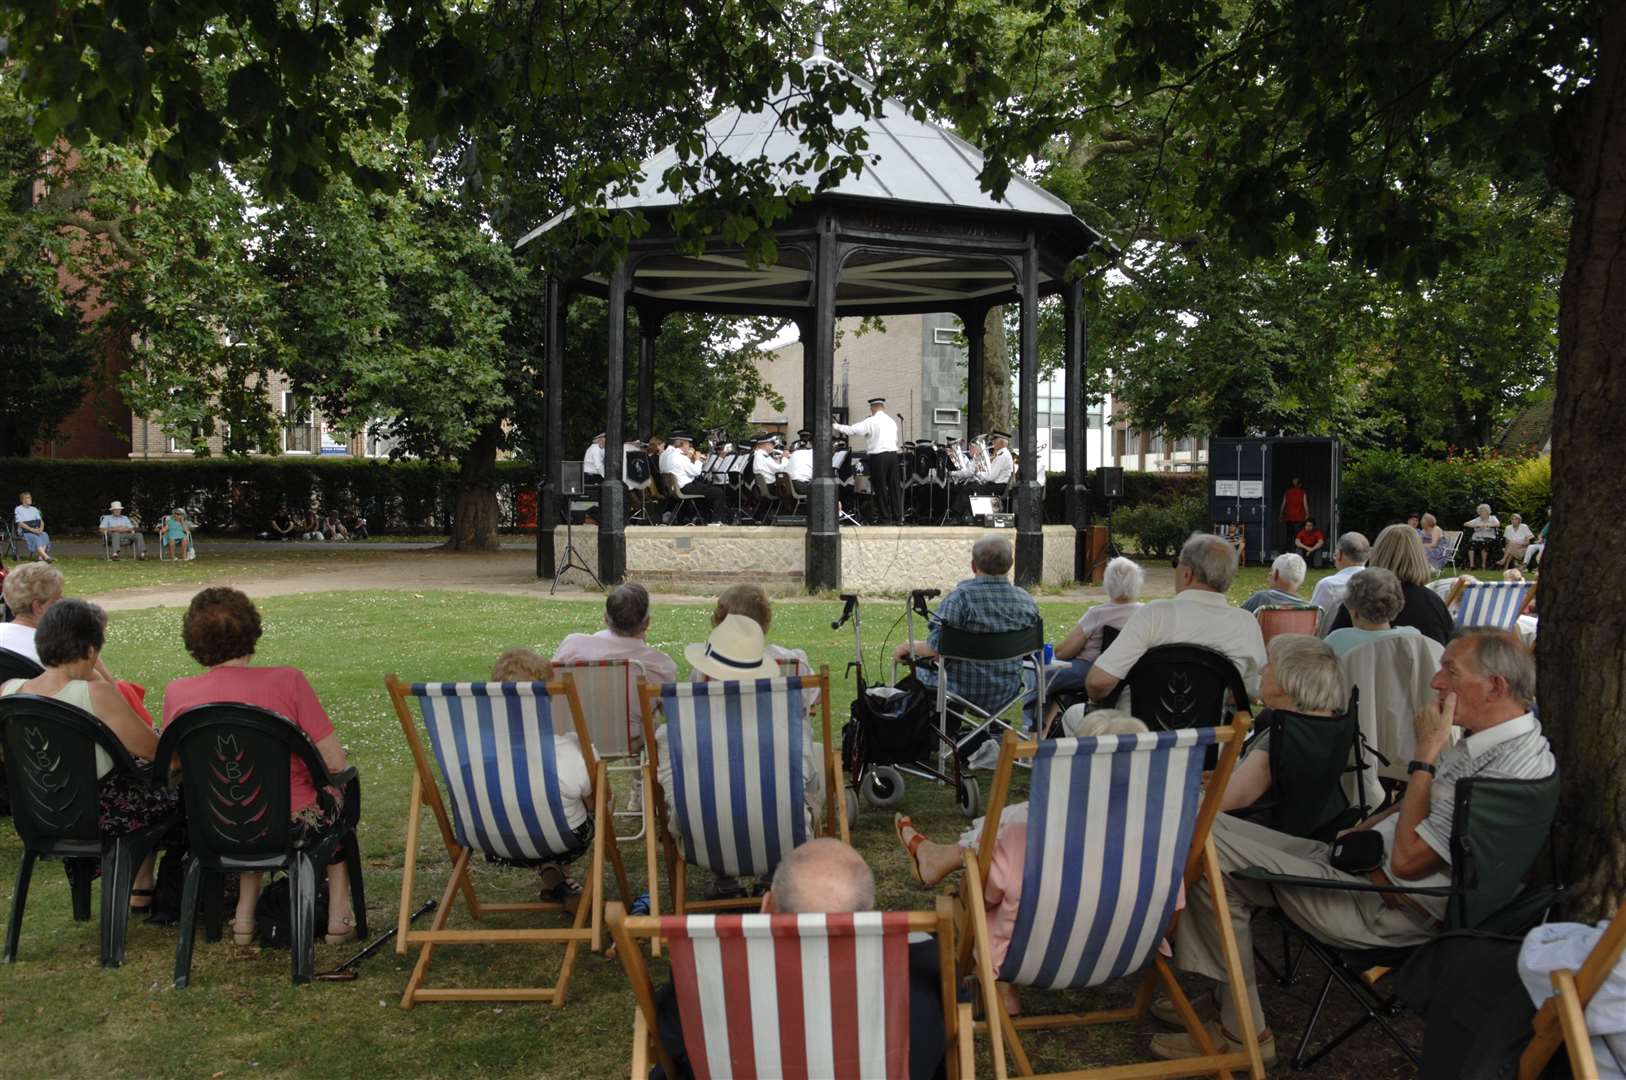 Happy days at the bandstand in Brenchley Gardens